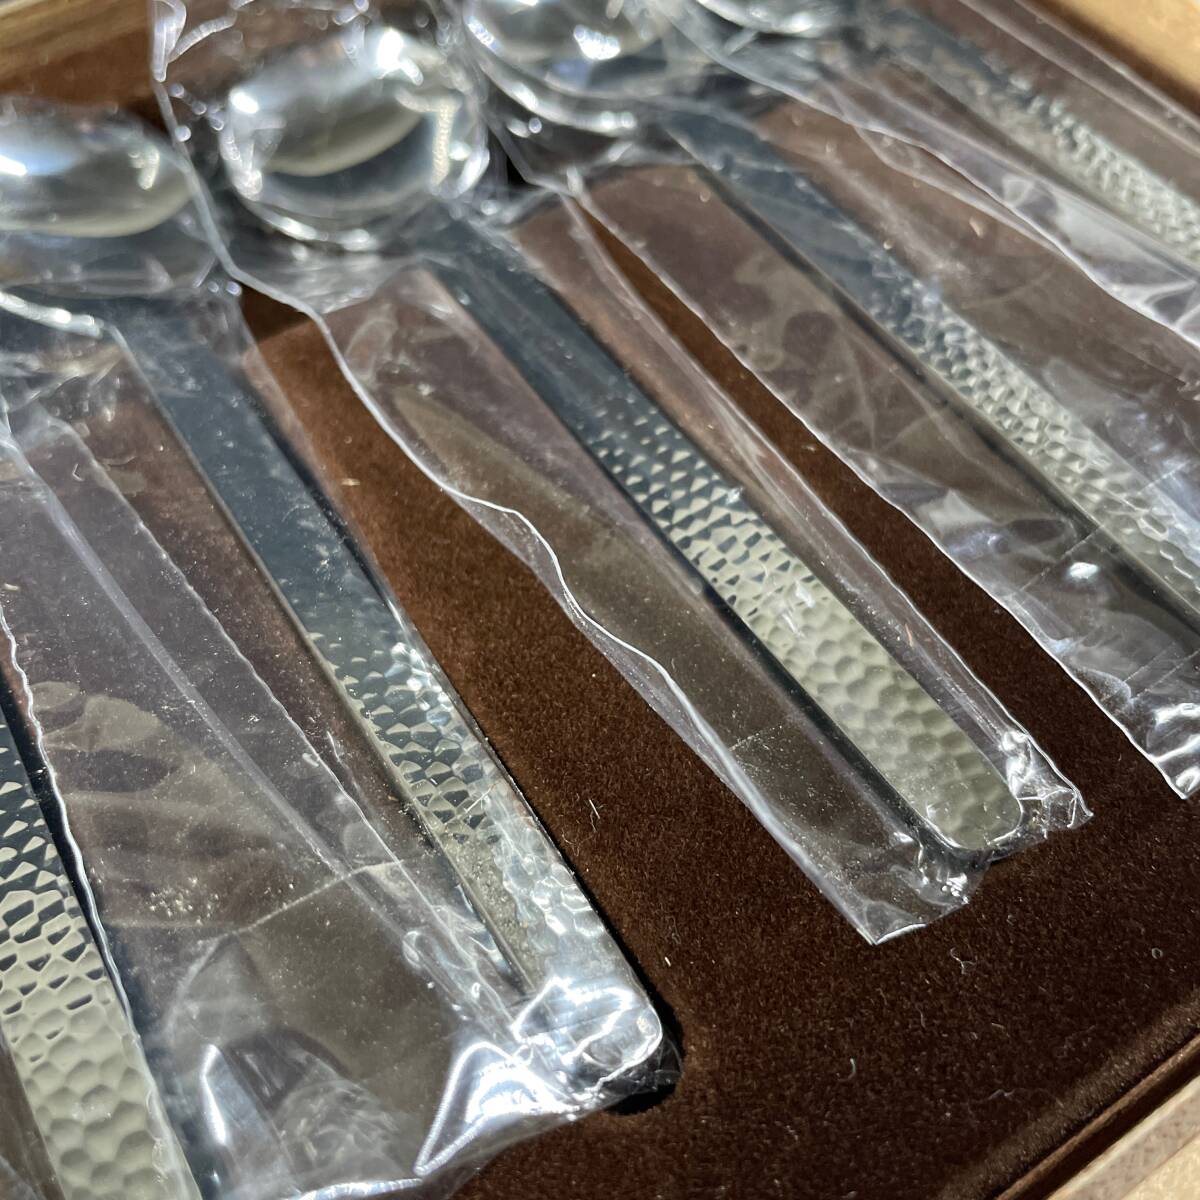  unused long-term keeping goods spoon set ... hammer eyes cutlery present condition goods /ee17e